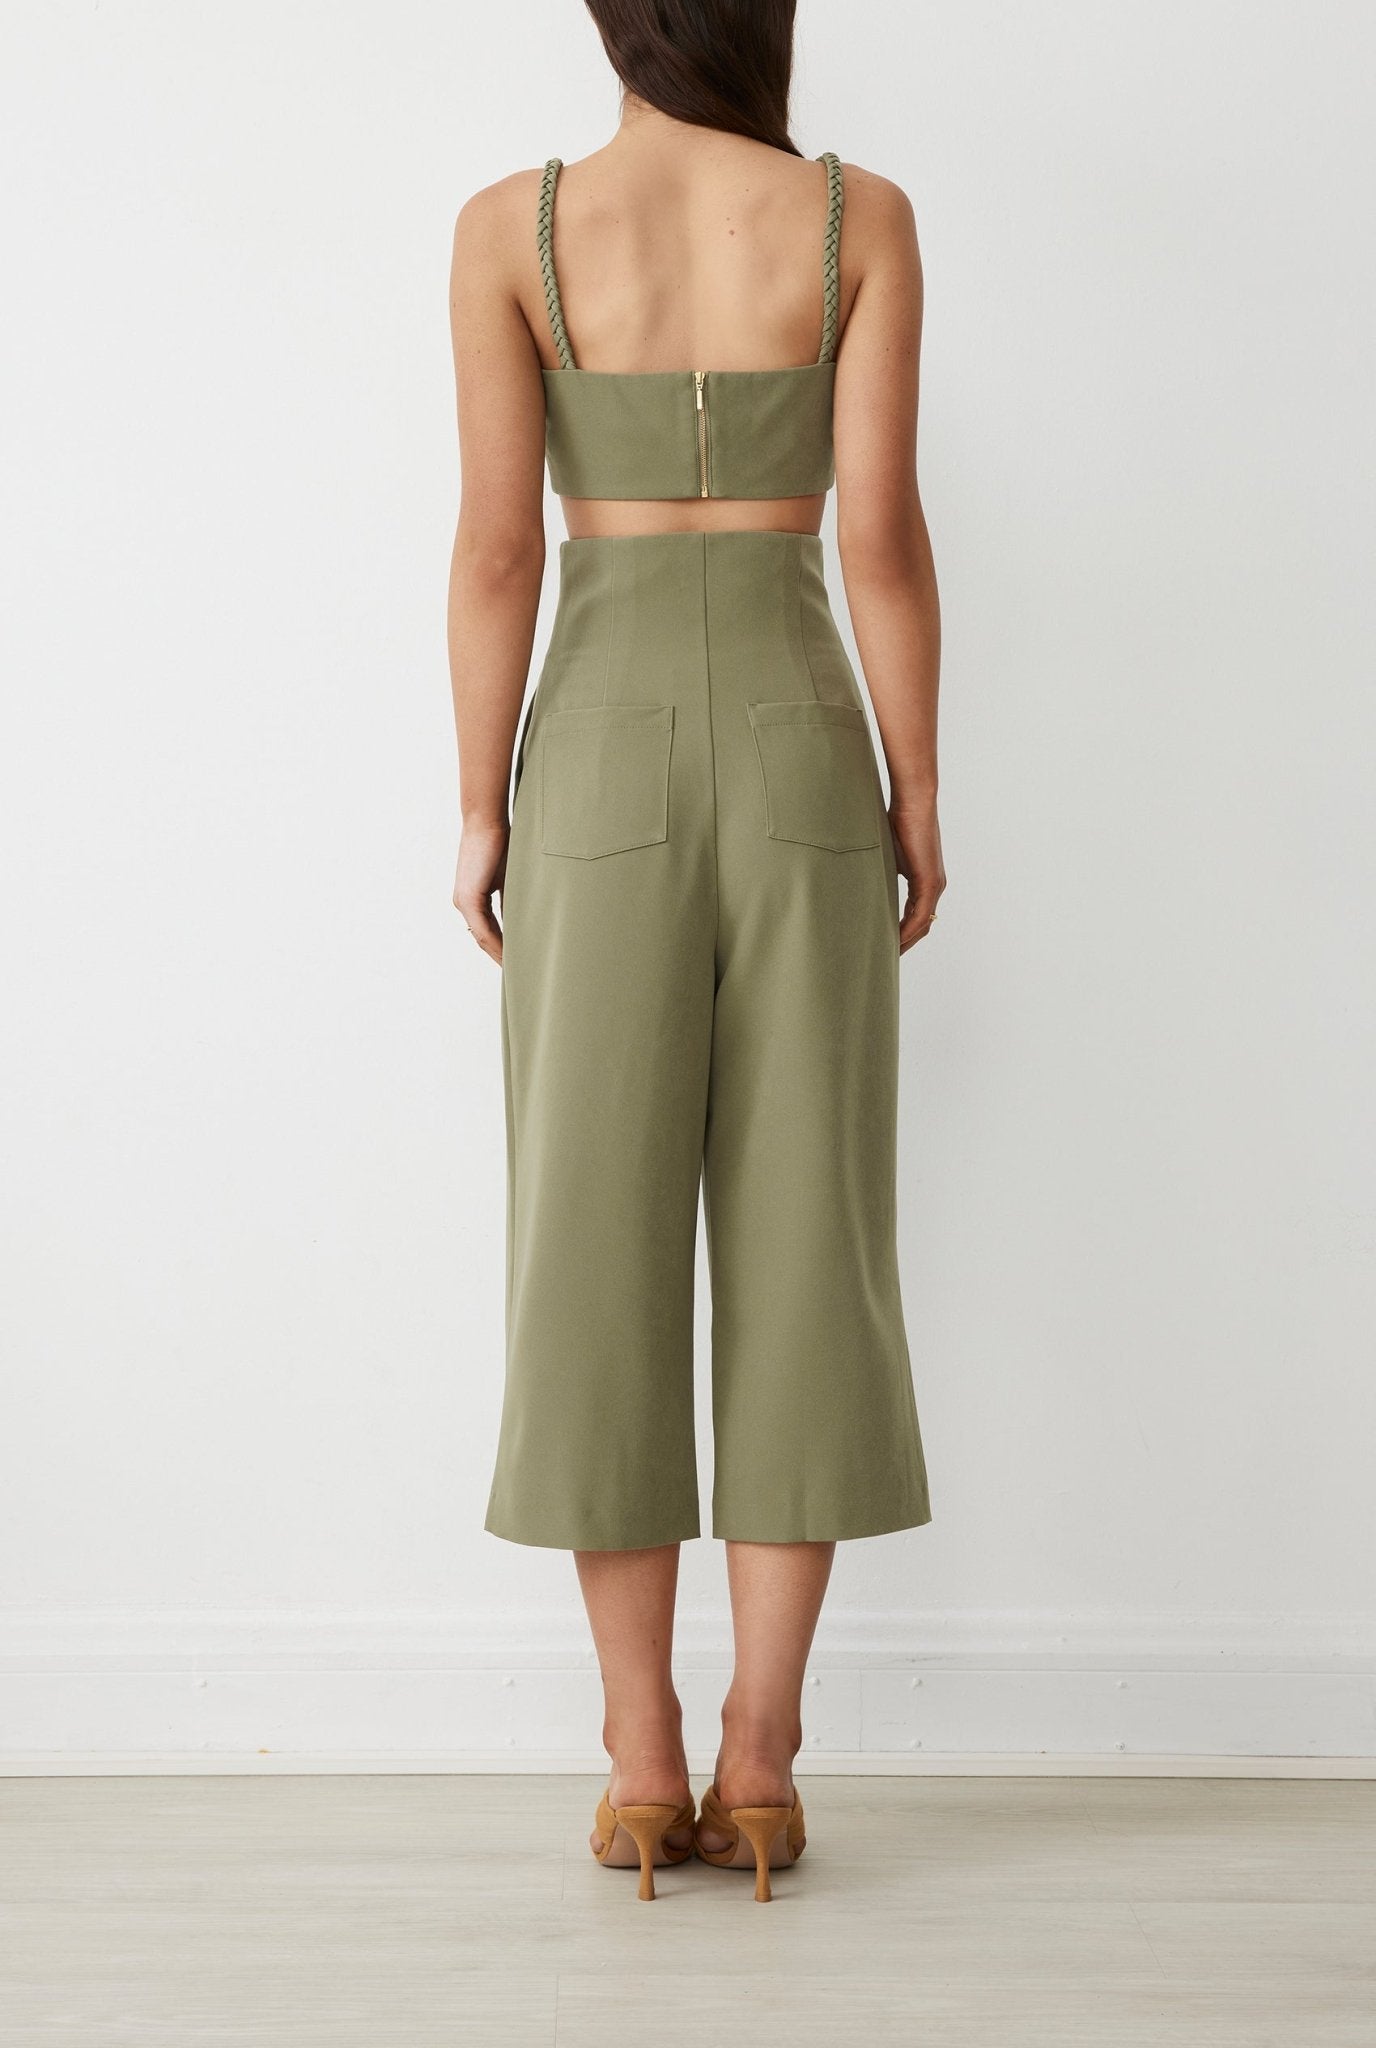 Auckland Pant in Moss - BOSKEMPER